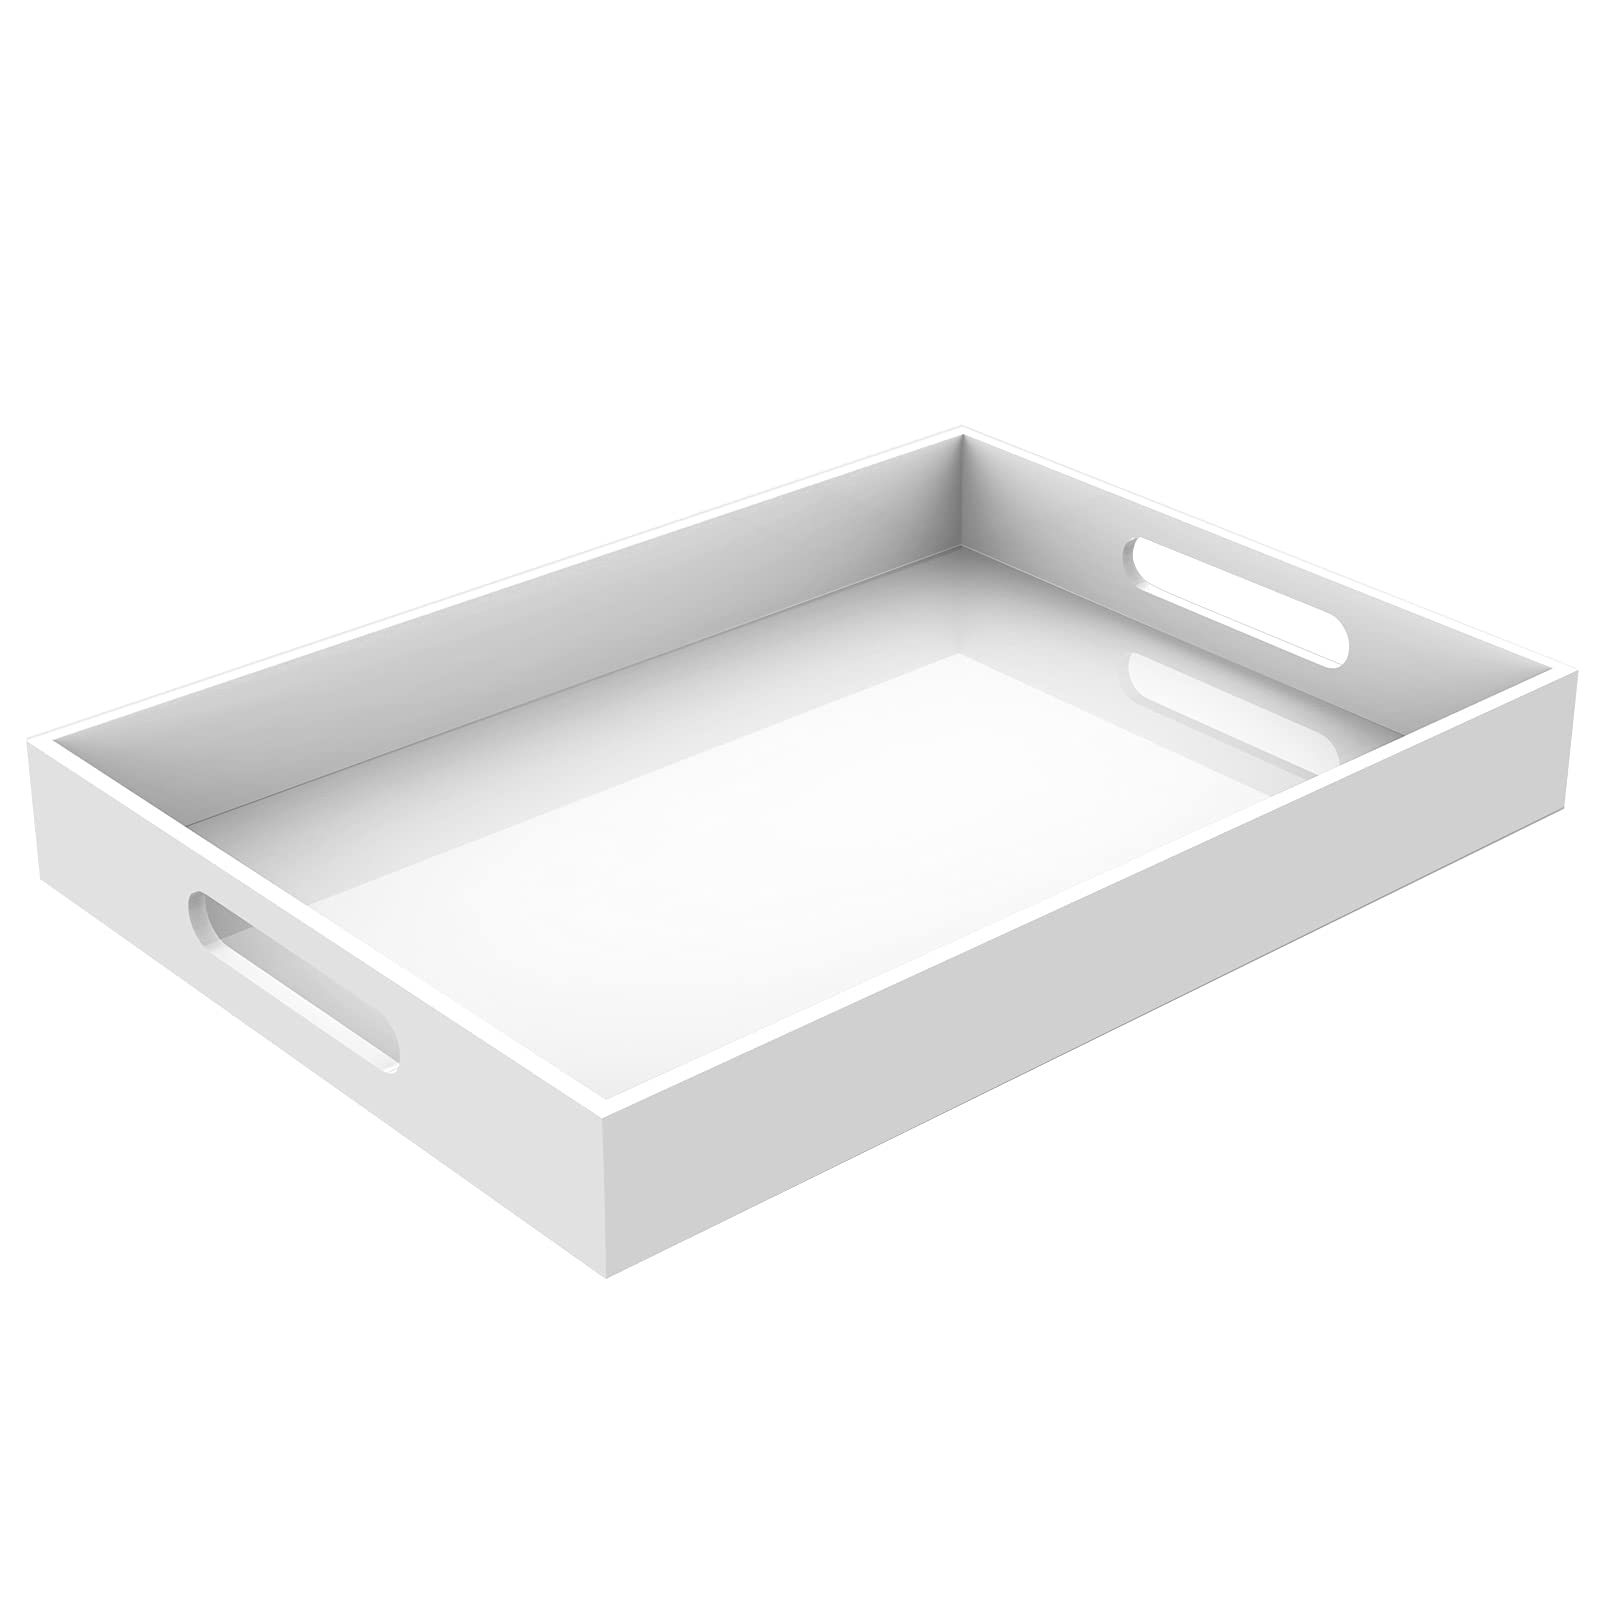 Cilinta Acrylic Serving Trays with Handles, 16"x 12" Rectangle Sturdy Breakfast Trays, White Decorative Trays Organiser for Bedroom, Kitchen, Living Room, Bathroom, Hospital and Outdoors